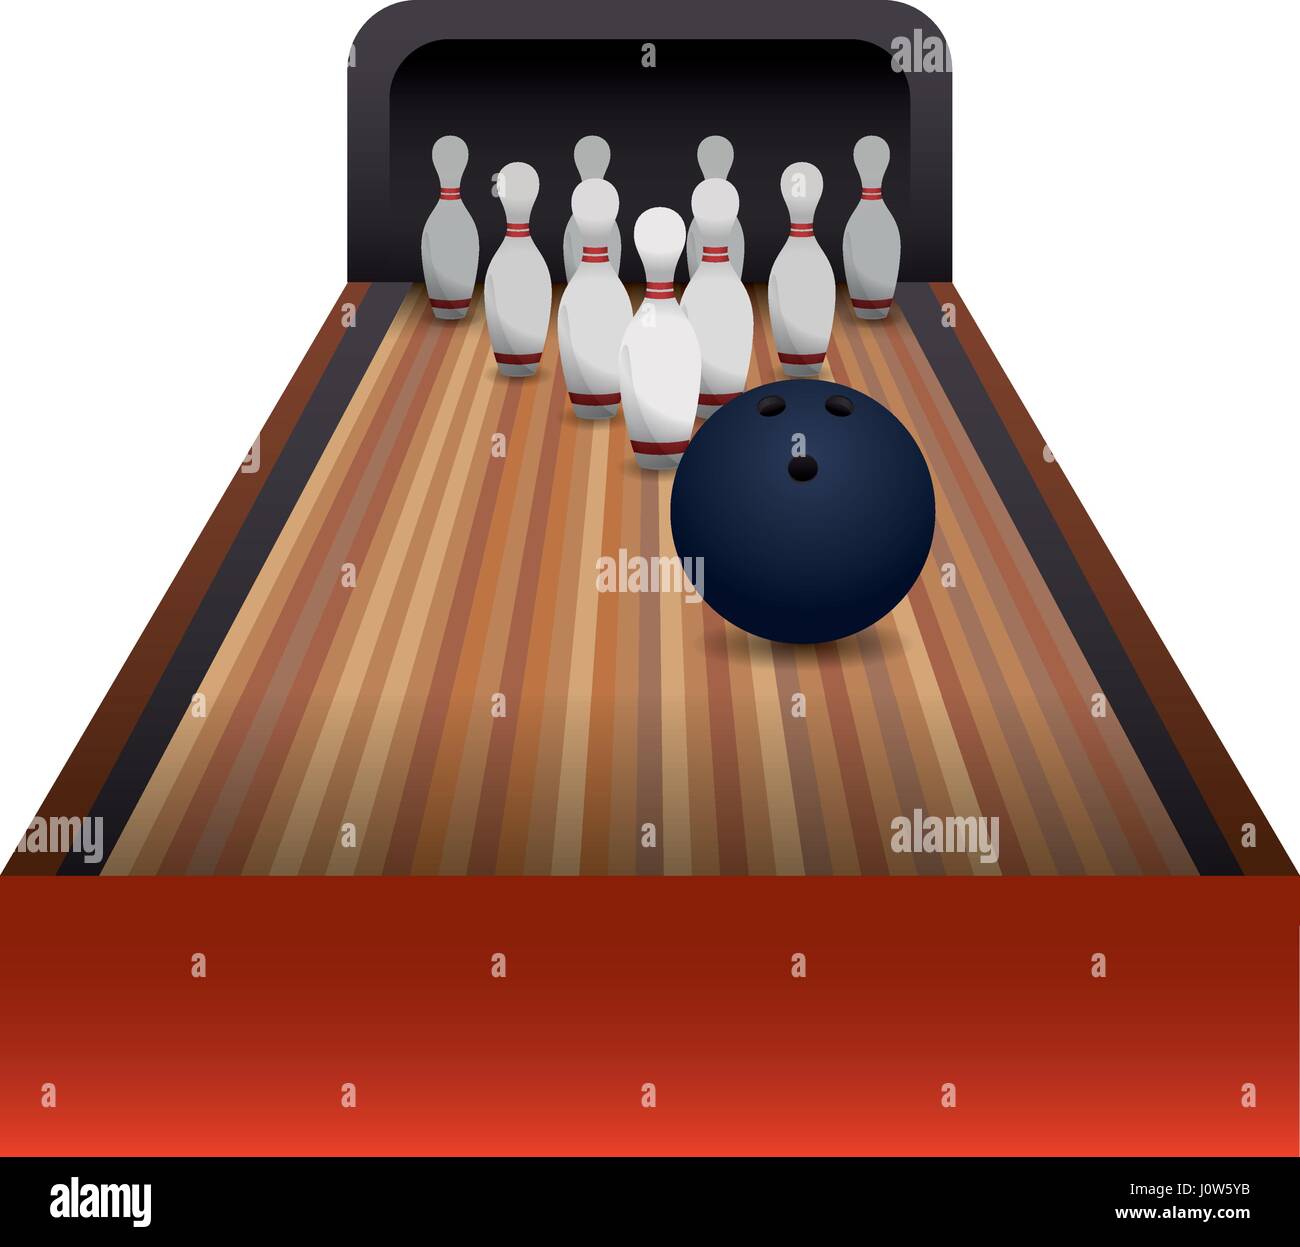 Bowling sport game Stock Vector